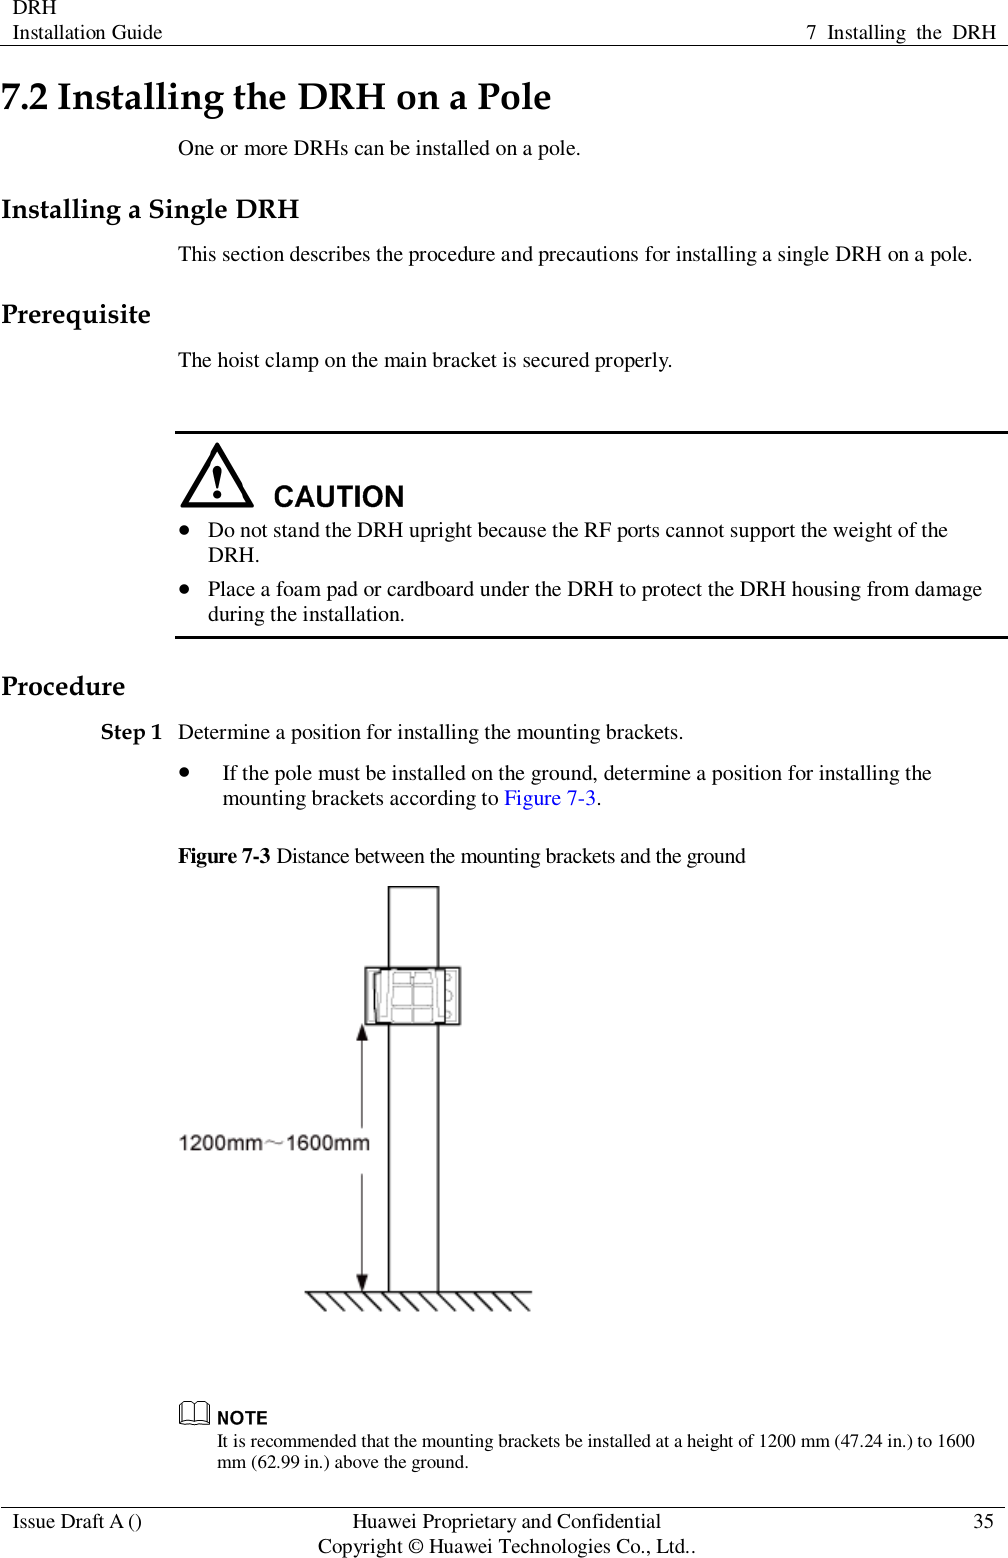 DRH   Installation Guide 7  Installing  the  DRH  Issue Draft A () Huawei Proprietary and Confidential                                     Copyright © Huawei Technologies Co., Ltd.. 35  7.2 Installing the DRH on a Pole One or more DRHs can be installed on a pole. Installing a Single DRH This section describes the procedure and precautions for installing a single DRH on a pole. Prerequisite The hoist clamp on the main bracket is secured properly.    Do not stand the DRH upright because the RF ports cannot support the weight of the DRH.  Place a foam pad or cardboard under the DRH to protect the DRH housing from damage during the installation. Procedure Step 1 Determine a position for installing the mounting brackets.  If the pole must be installed on the ground, determine a position for installing the mounting brackets according to Figure 7-3. Figure 7-3 Distance between the mounting brackets and the ground    It is recommended that the mounting brackets be installed at a height of 1200 mm (47.24 in.) to 1600 mm (62.99 in.) above the ground.   